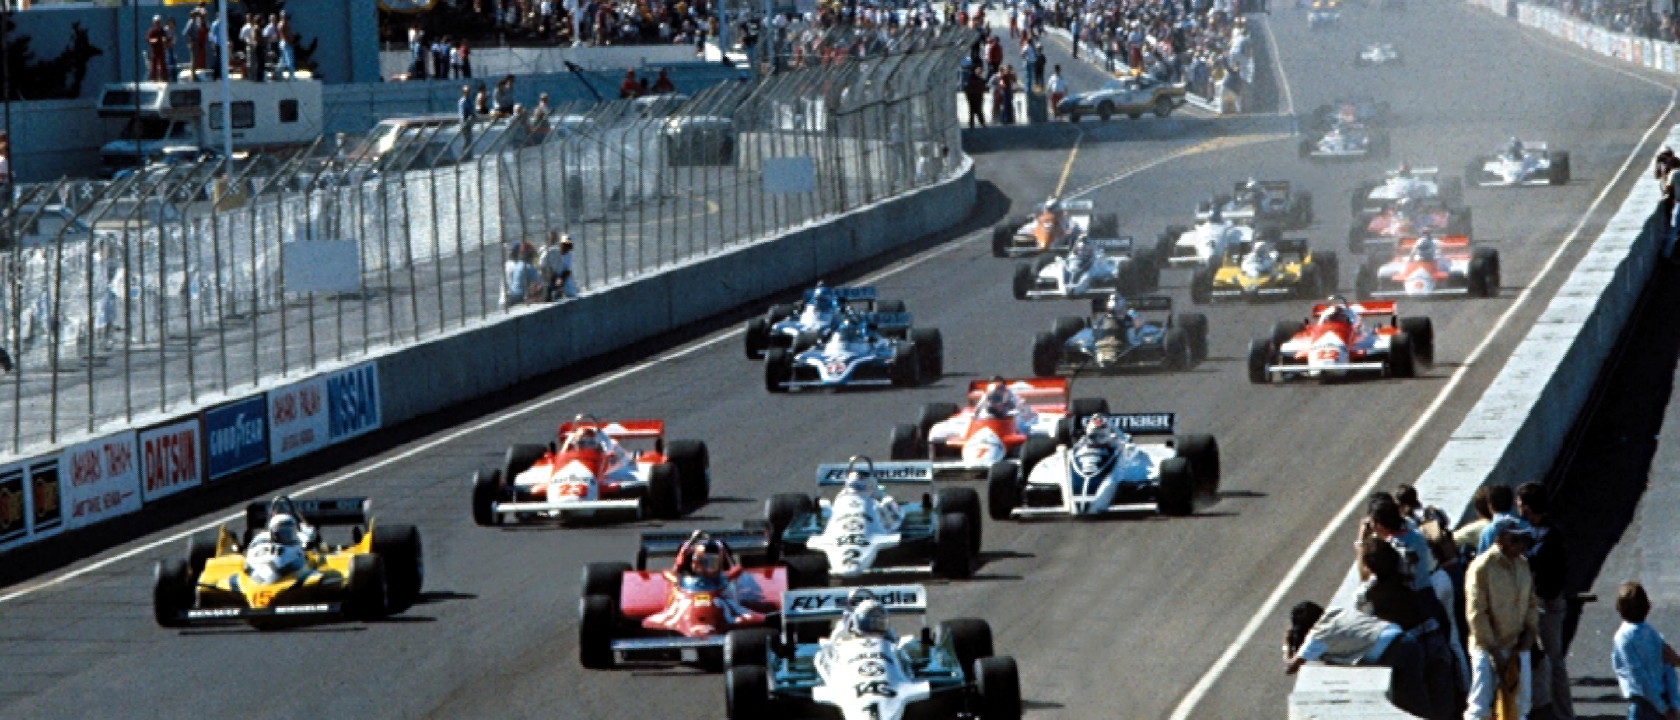 Alan Jones in the lead at the start of the 1981 Caesars Palace Grand Prix in Las Vegas.